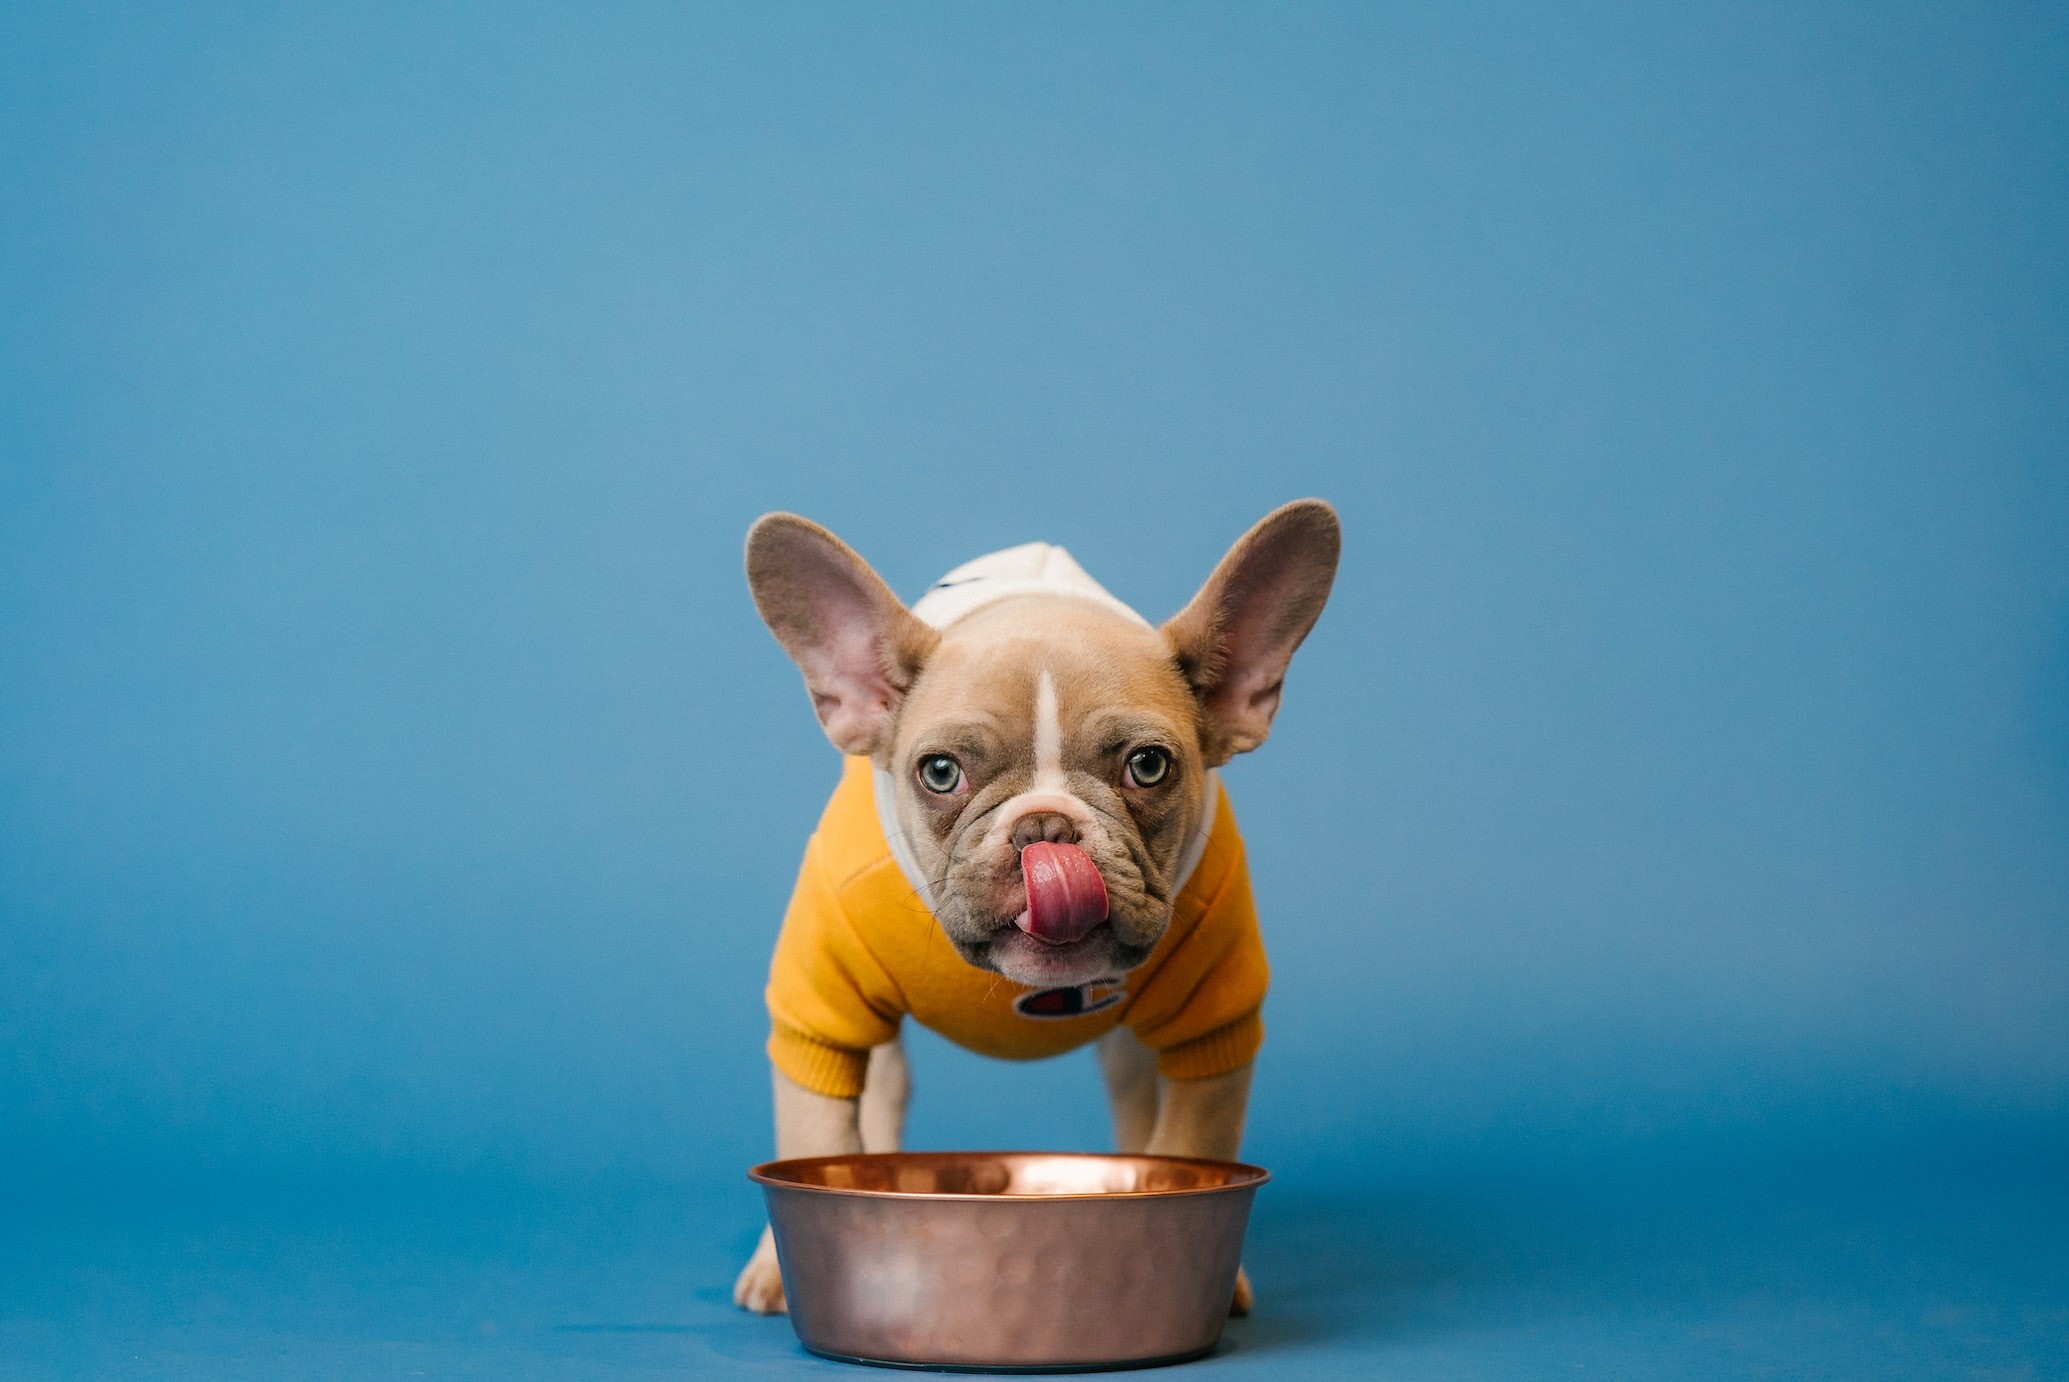 petite dog savoring its meal licking its face beside a bowl